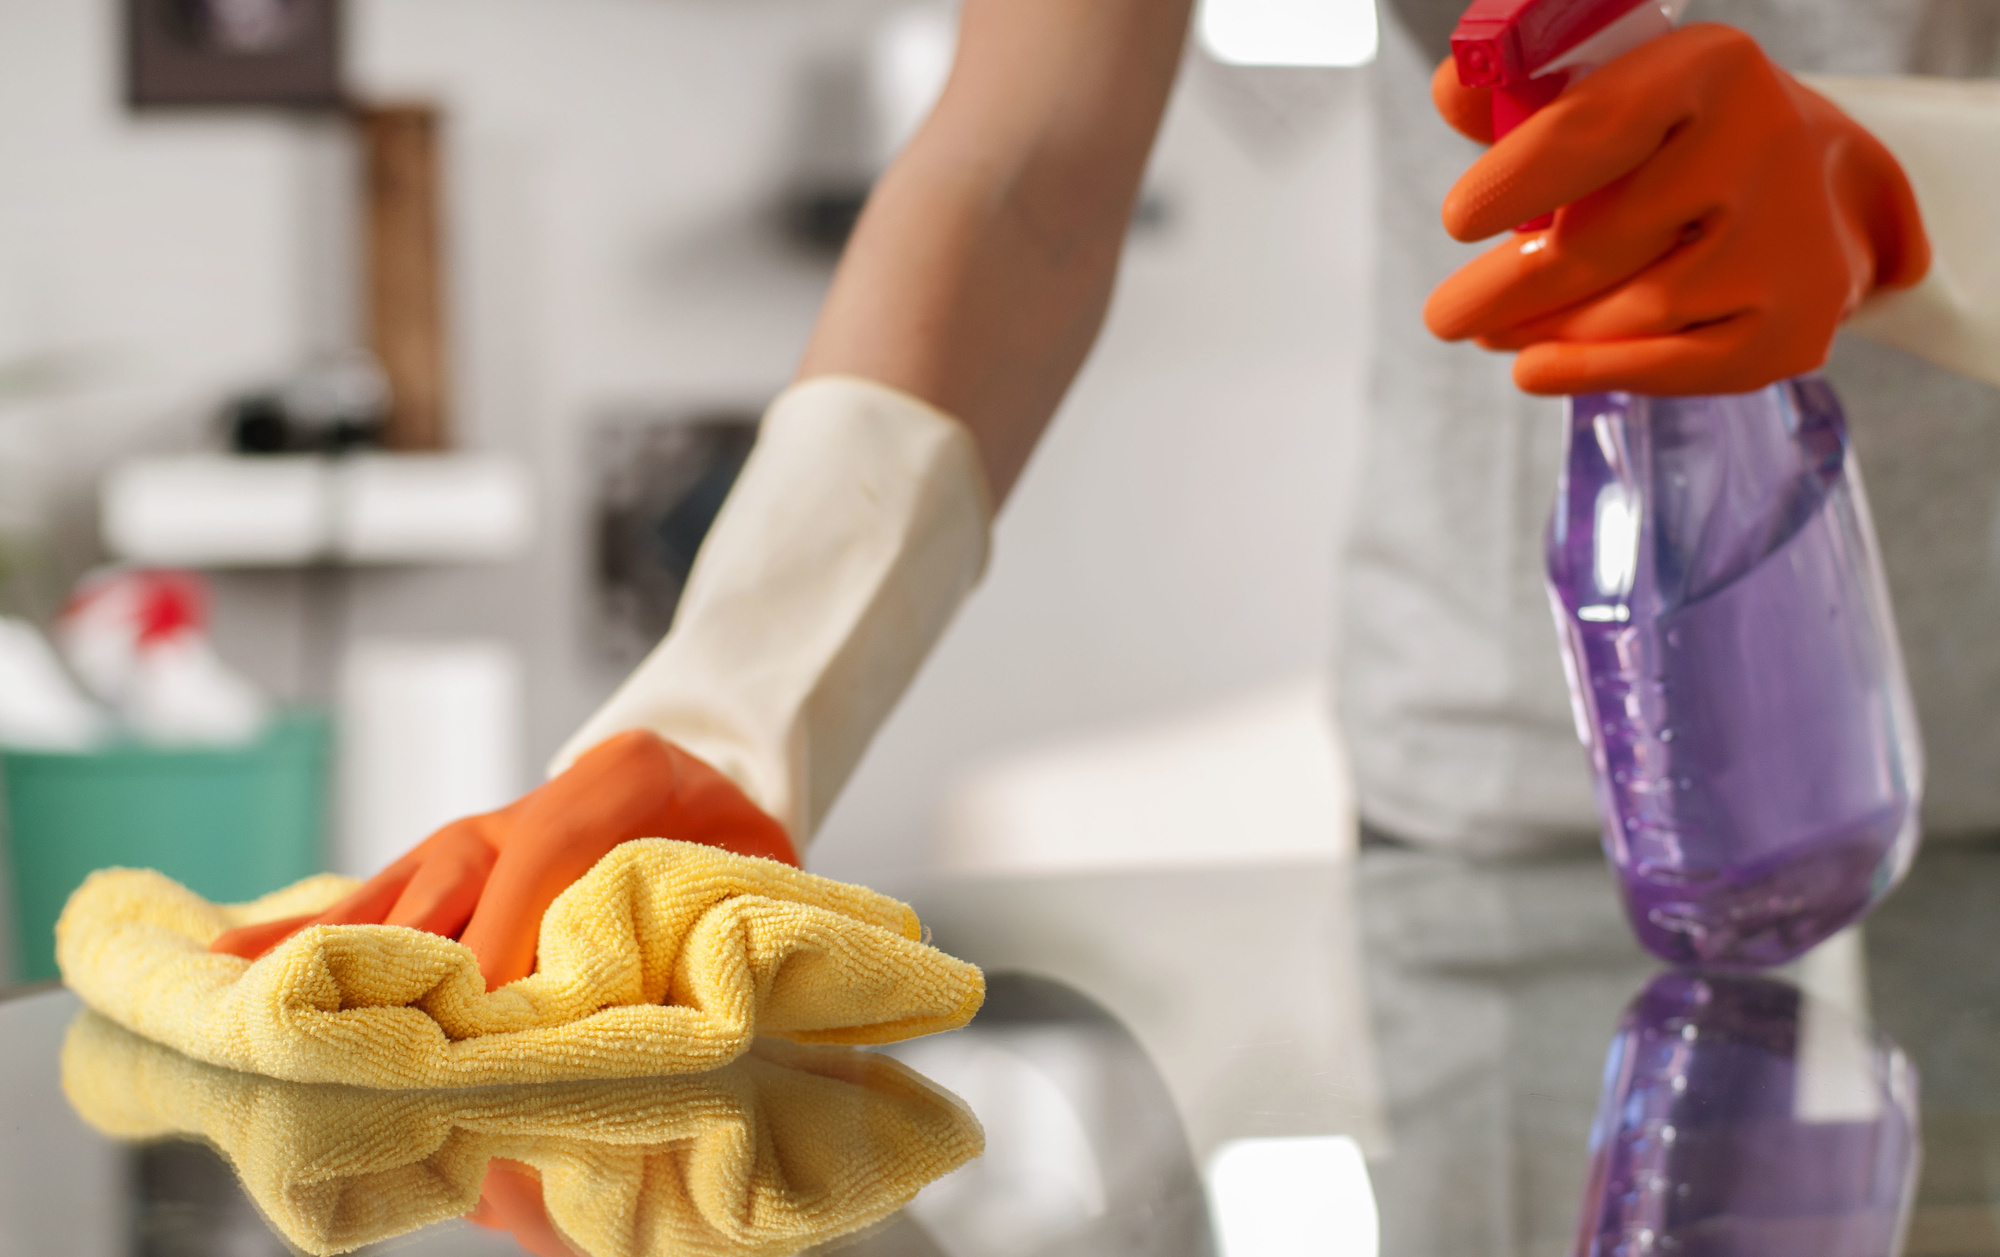 If you are moving out of your current home, then you may benefit from hiring move out cleaners. Here are 5 ways these services can help you.